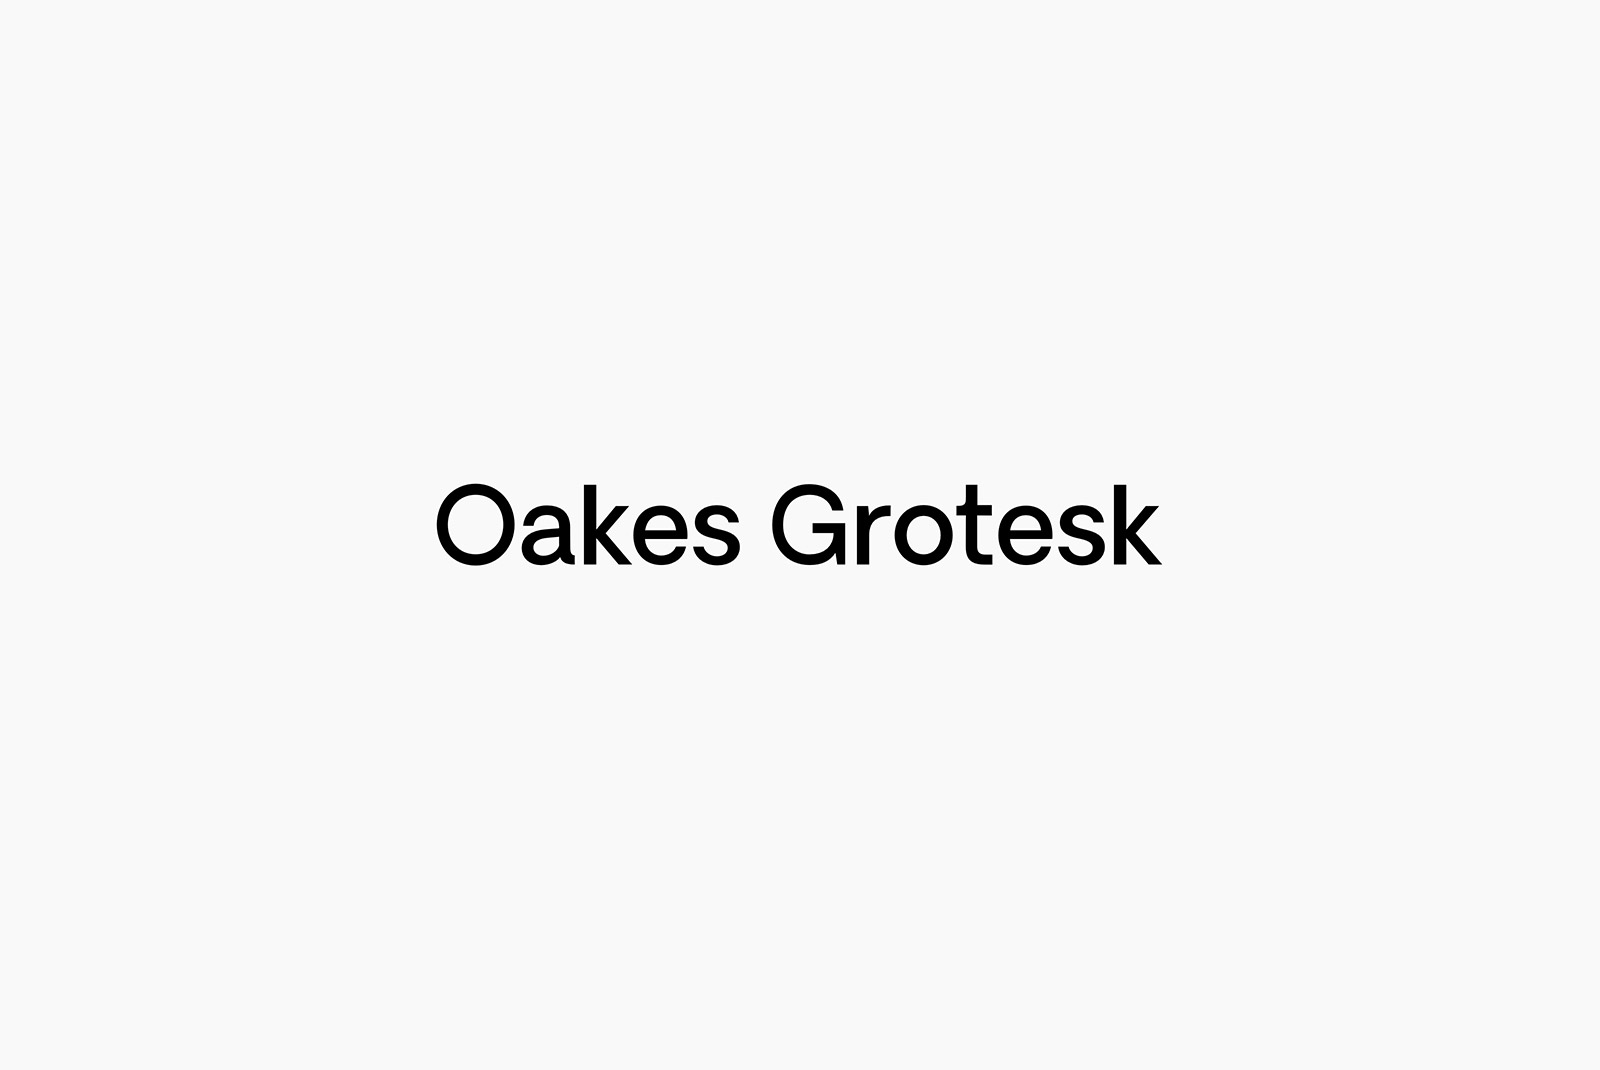 Elegant modern sans serif font Oakes Grotesk displayed on a clean background, ideal for graphic design, web fonts, and typography.